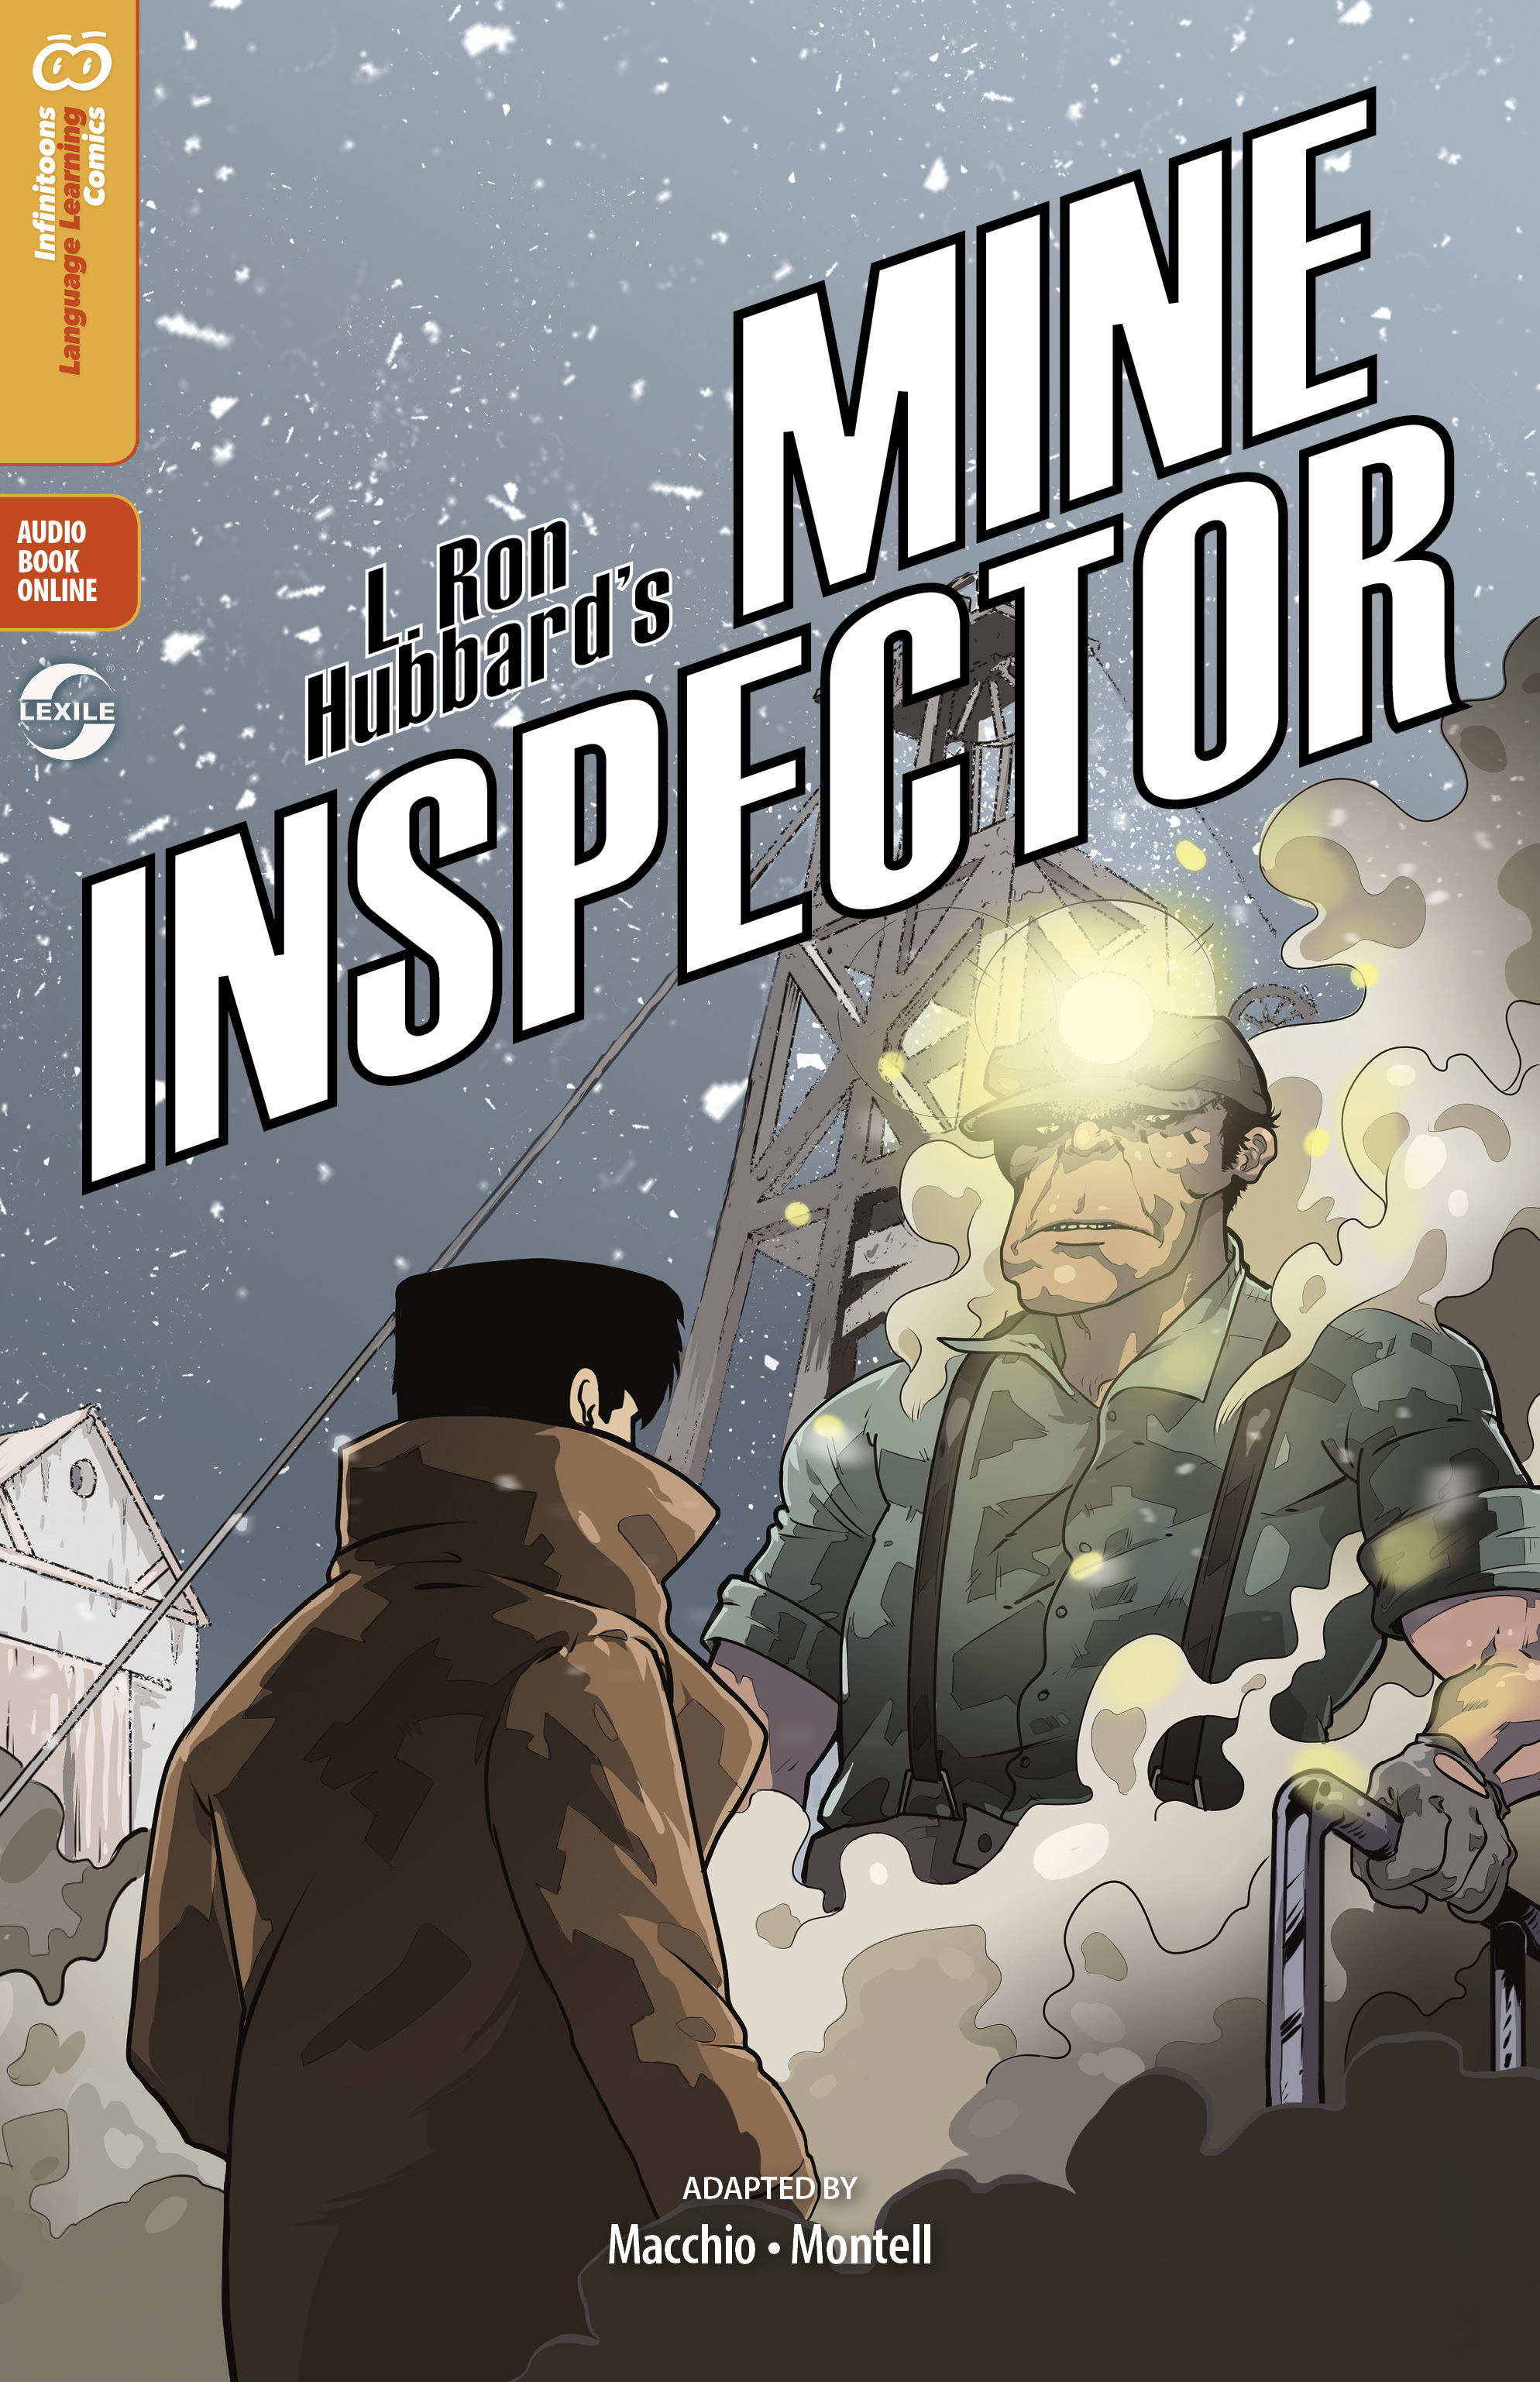 171110 Mine Inspector cover and interior-AH-171207a-cover.jpg